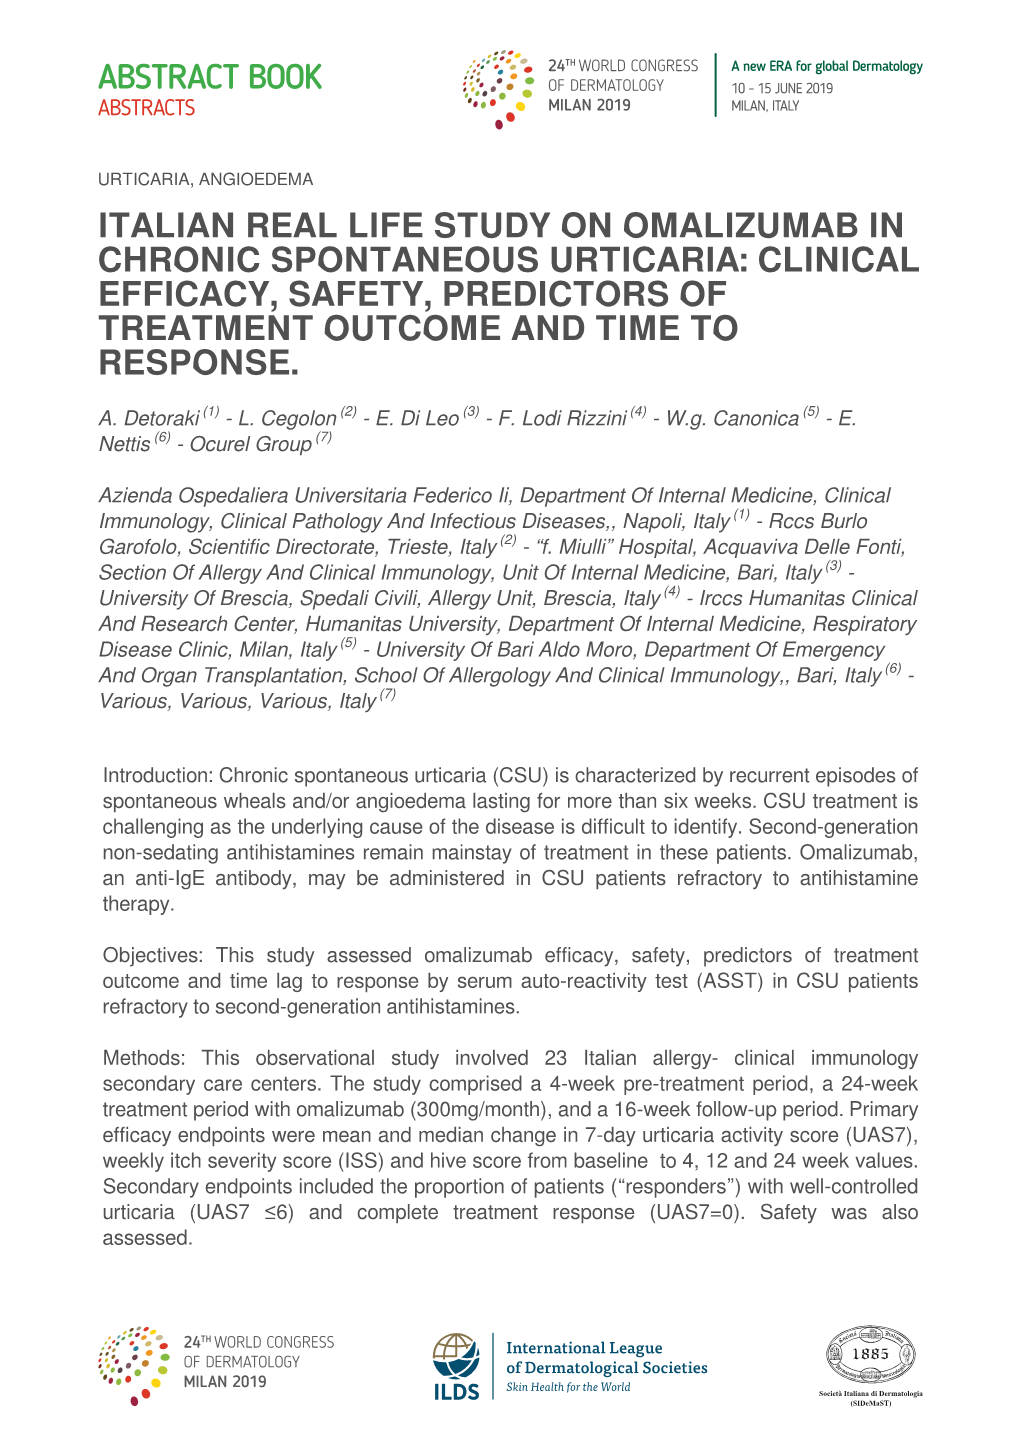 Italian Real Life Study on Omalizumab in Chronic Spontaneous Urticaria: Clinical Efficacy, Safety, Predictors of Treatment Outcome and Time to Response